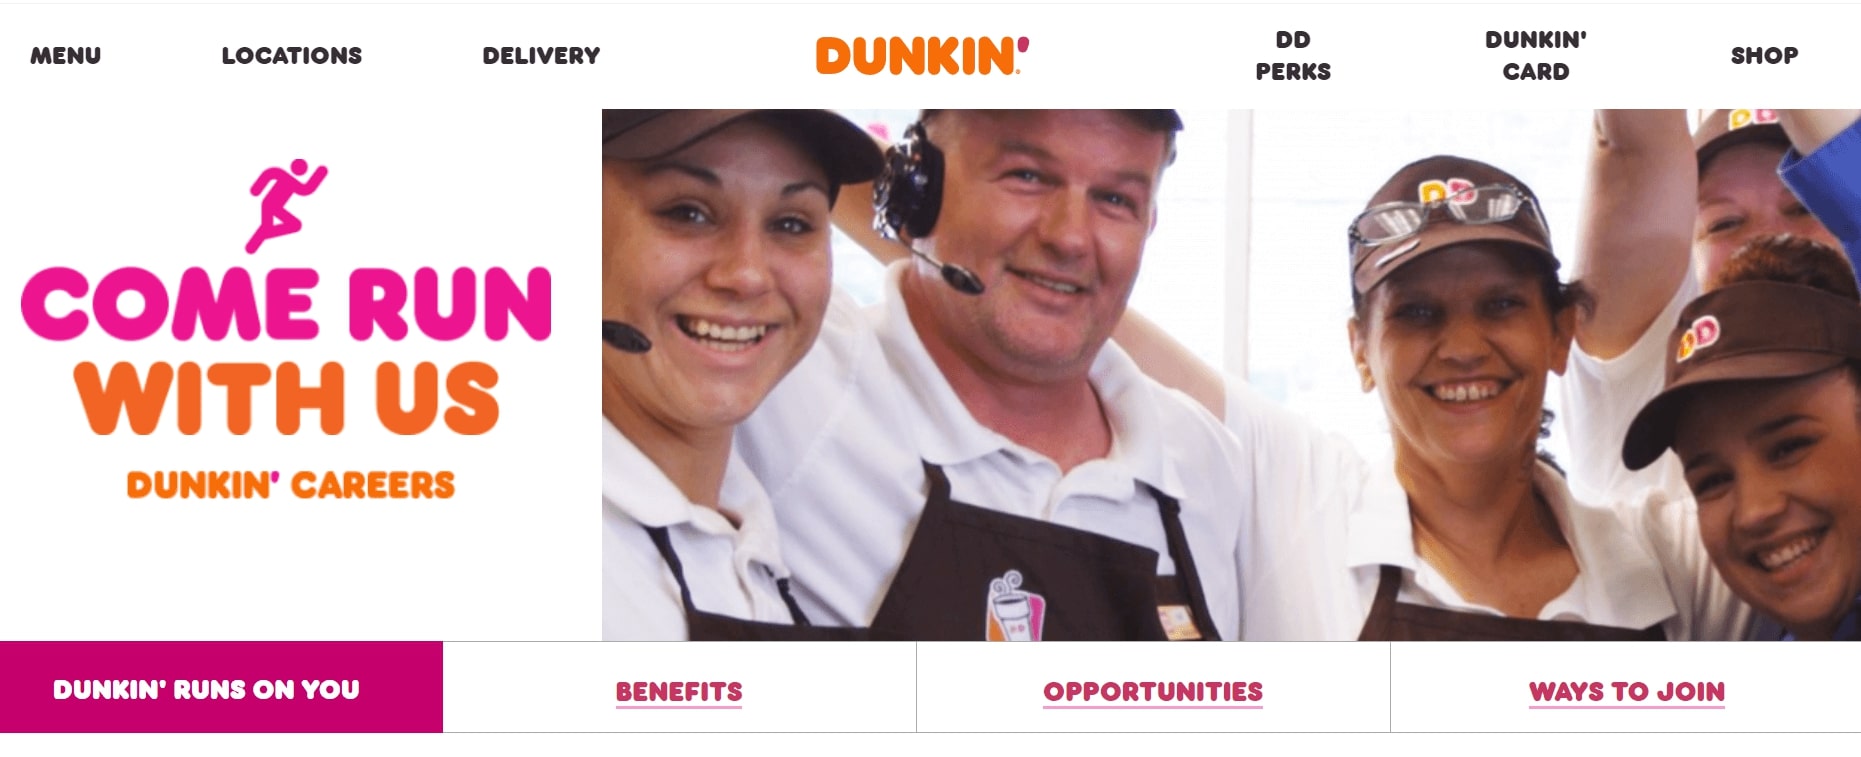 Dunkin' Donuts interview question guide